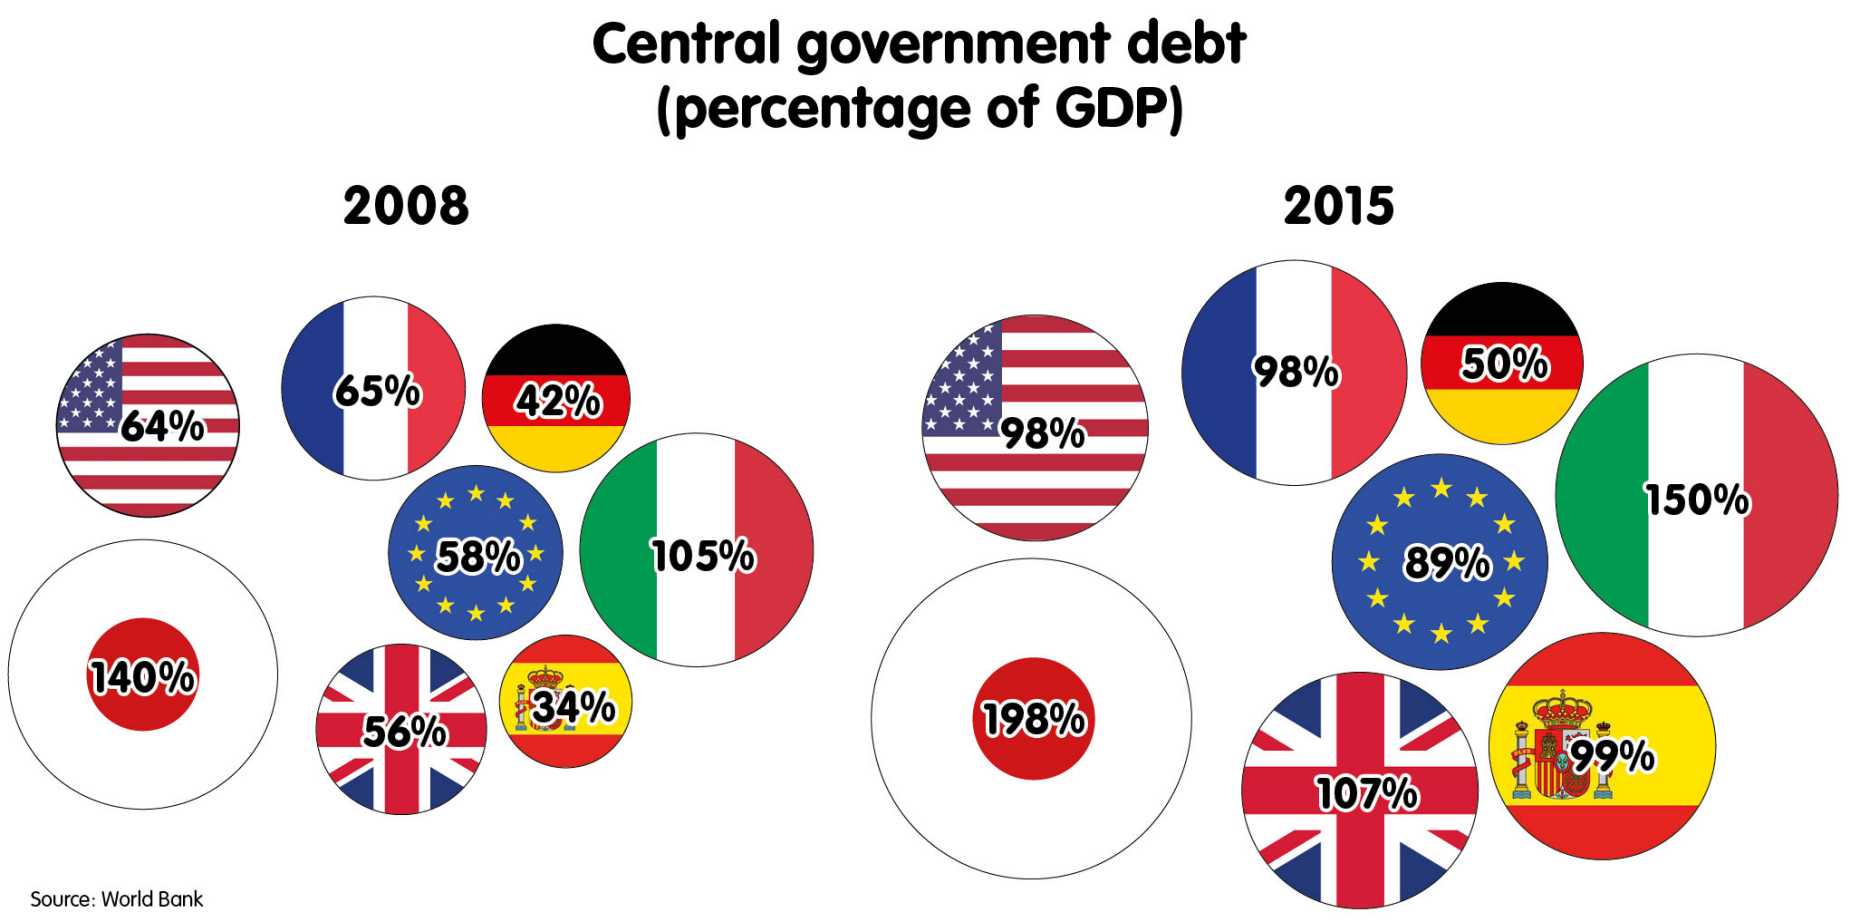 Central government debt